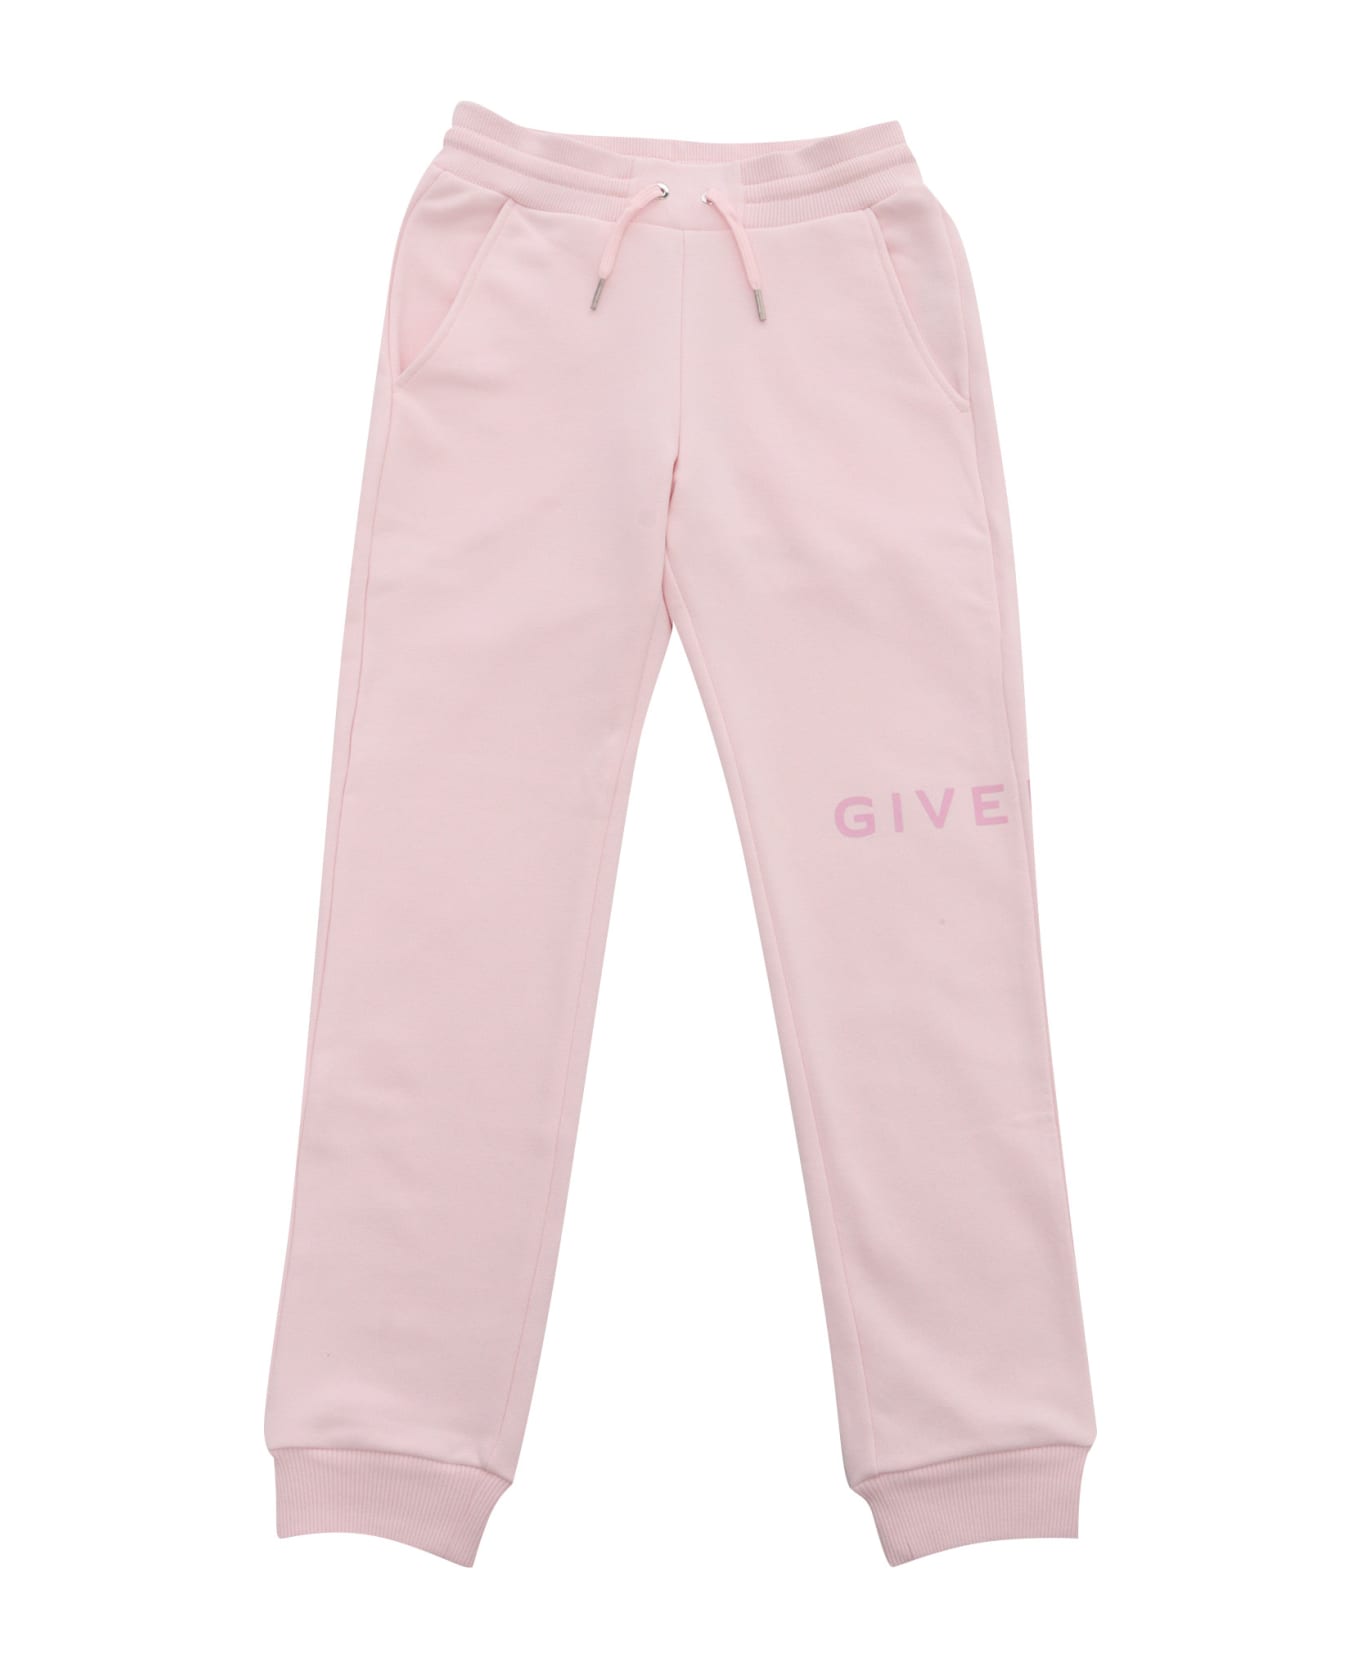 Givenchy Pink Jogging Trousers - PINK